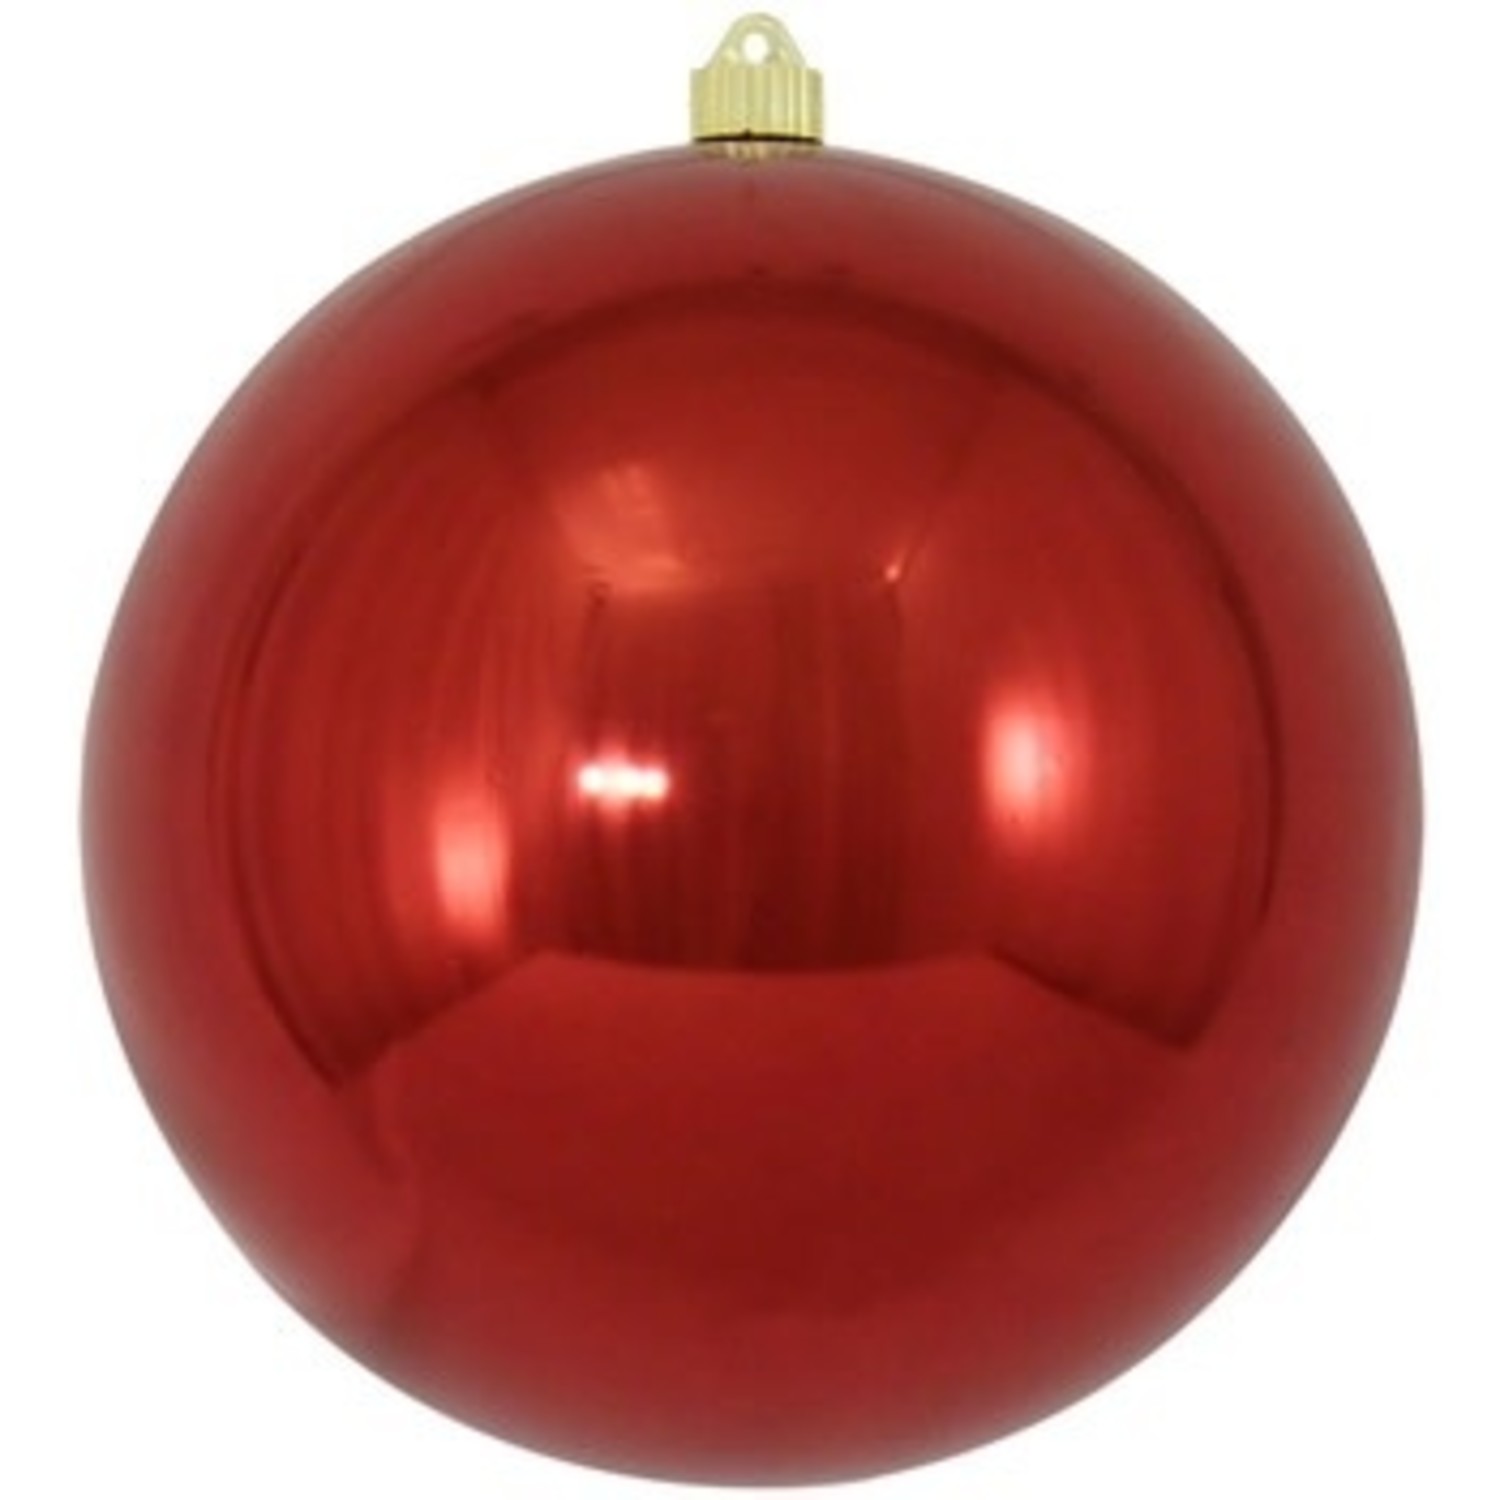 10 Giant Commercial Ball Ornament Case